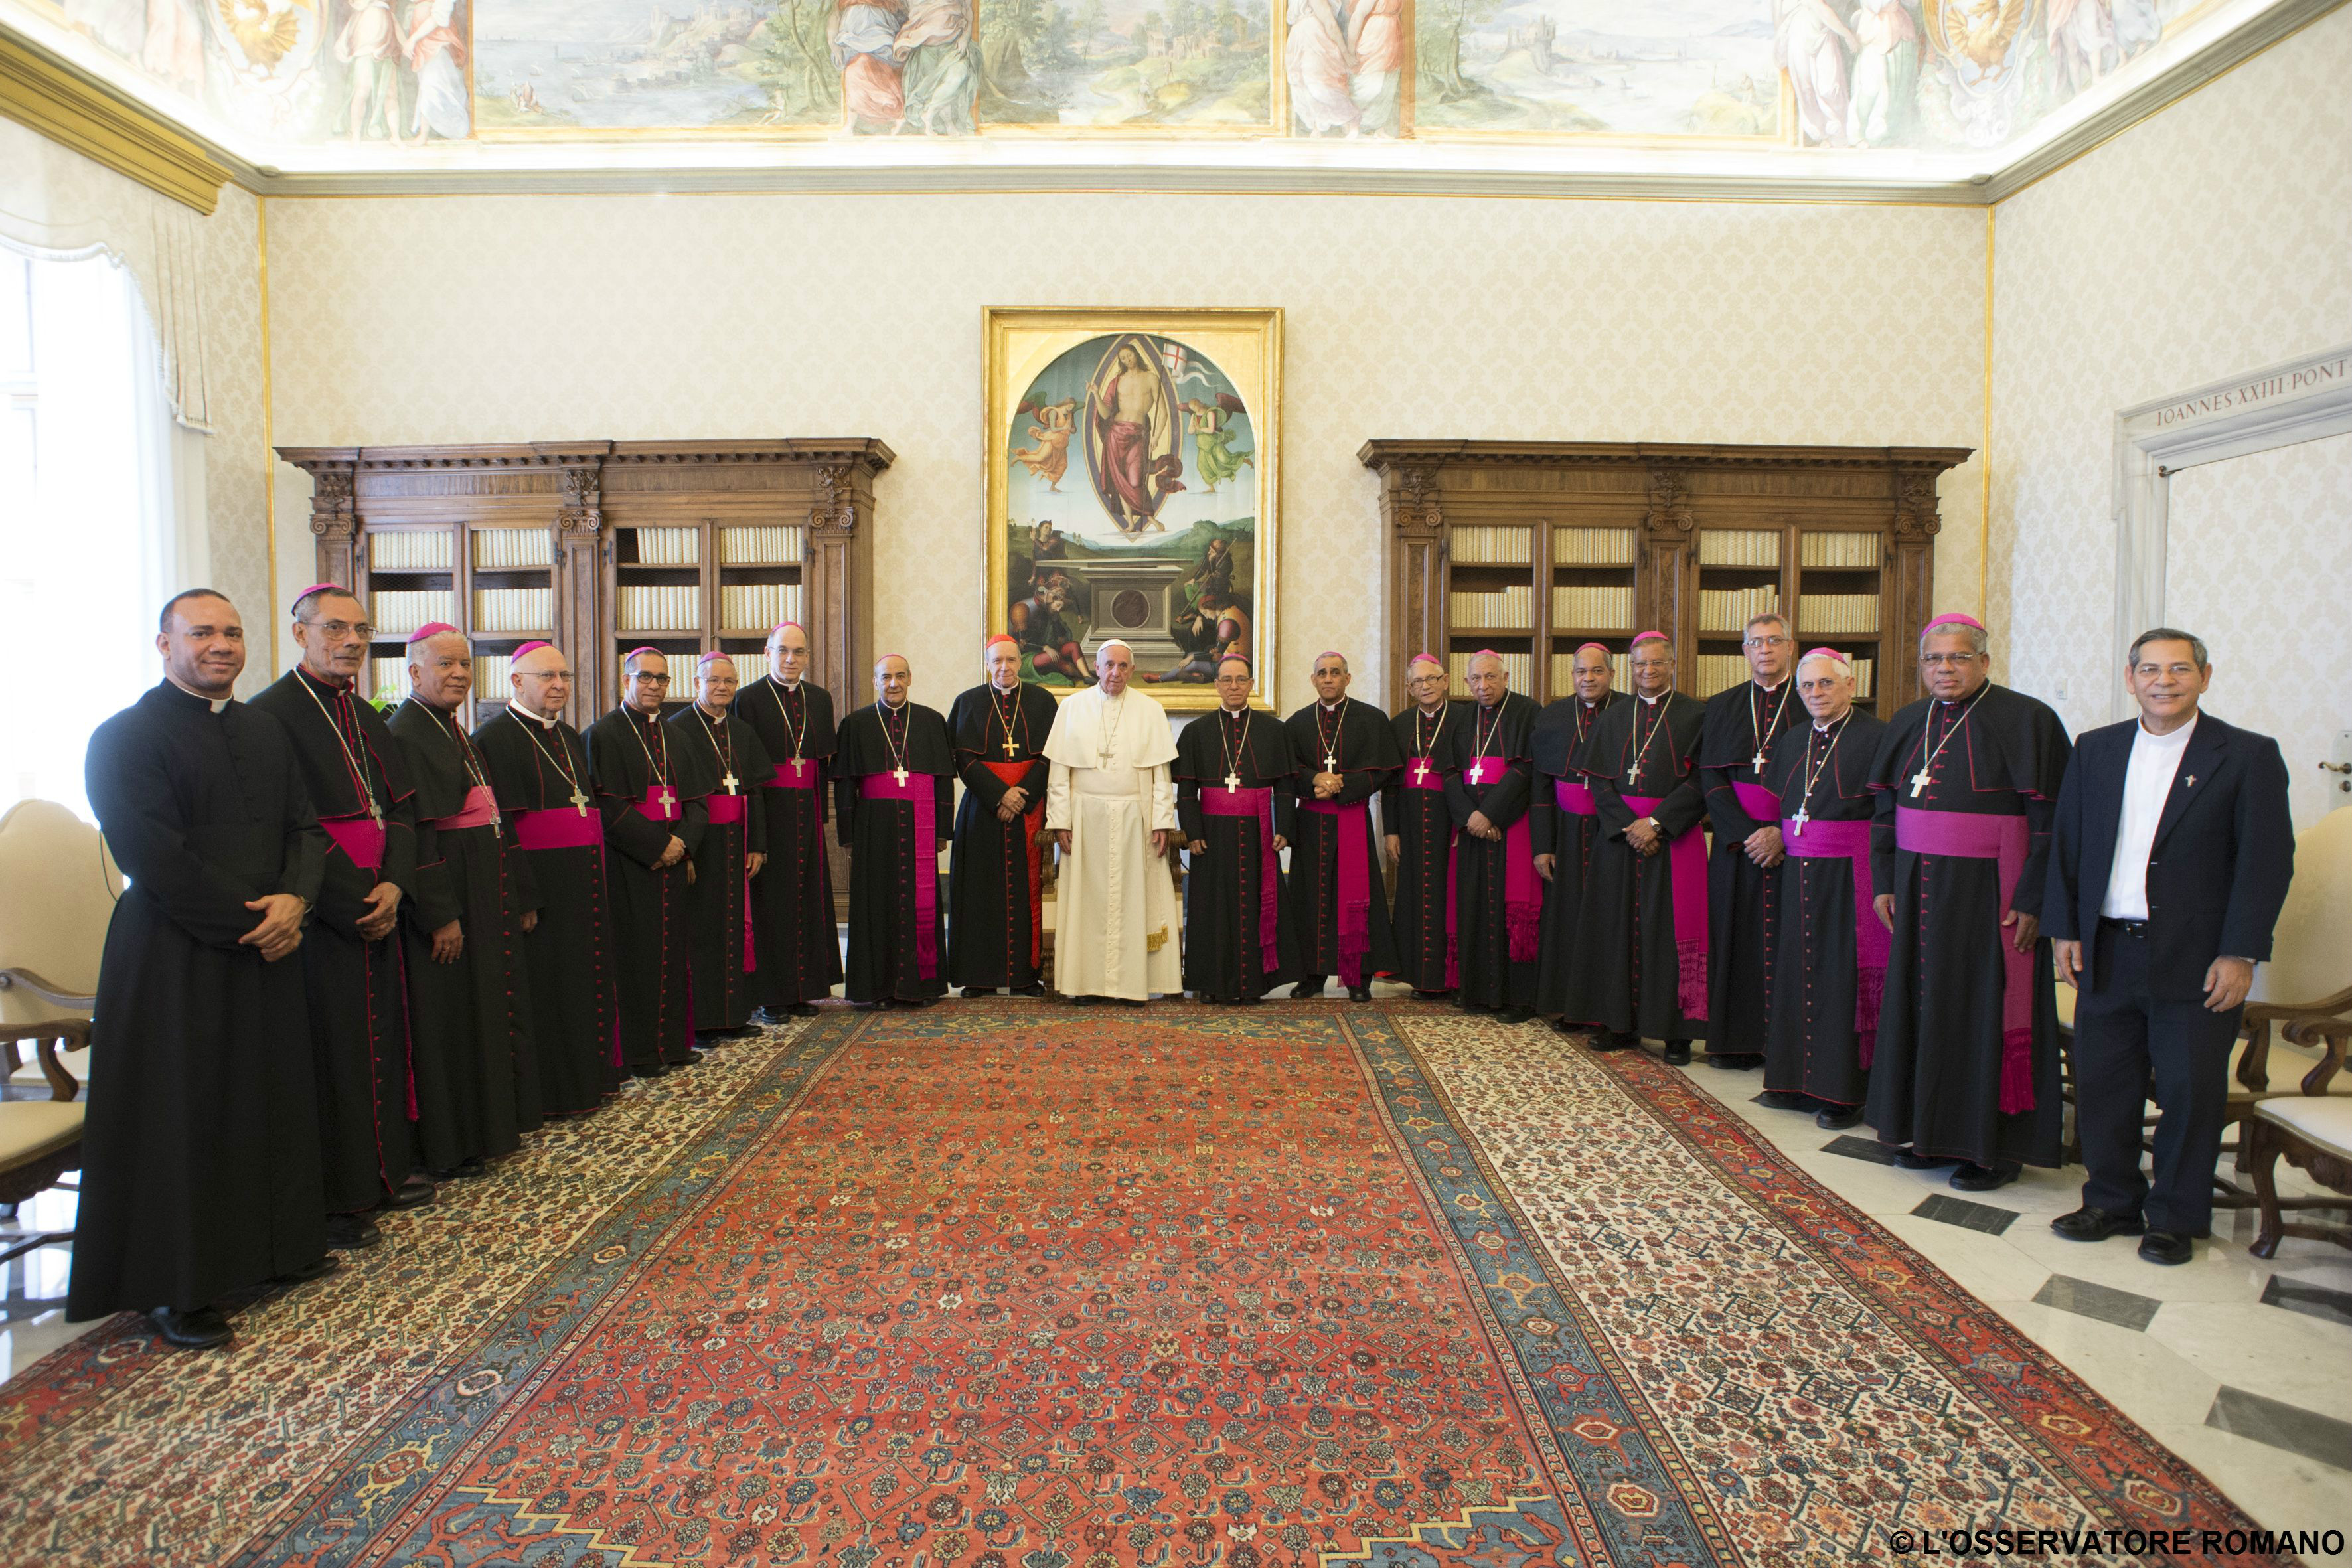 Pope Francis receives bishops of Dominican Republic in "ad limina" visit